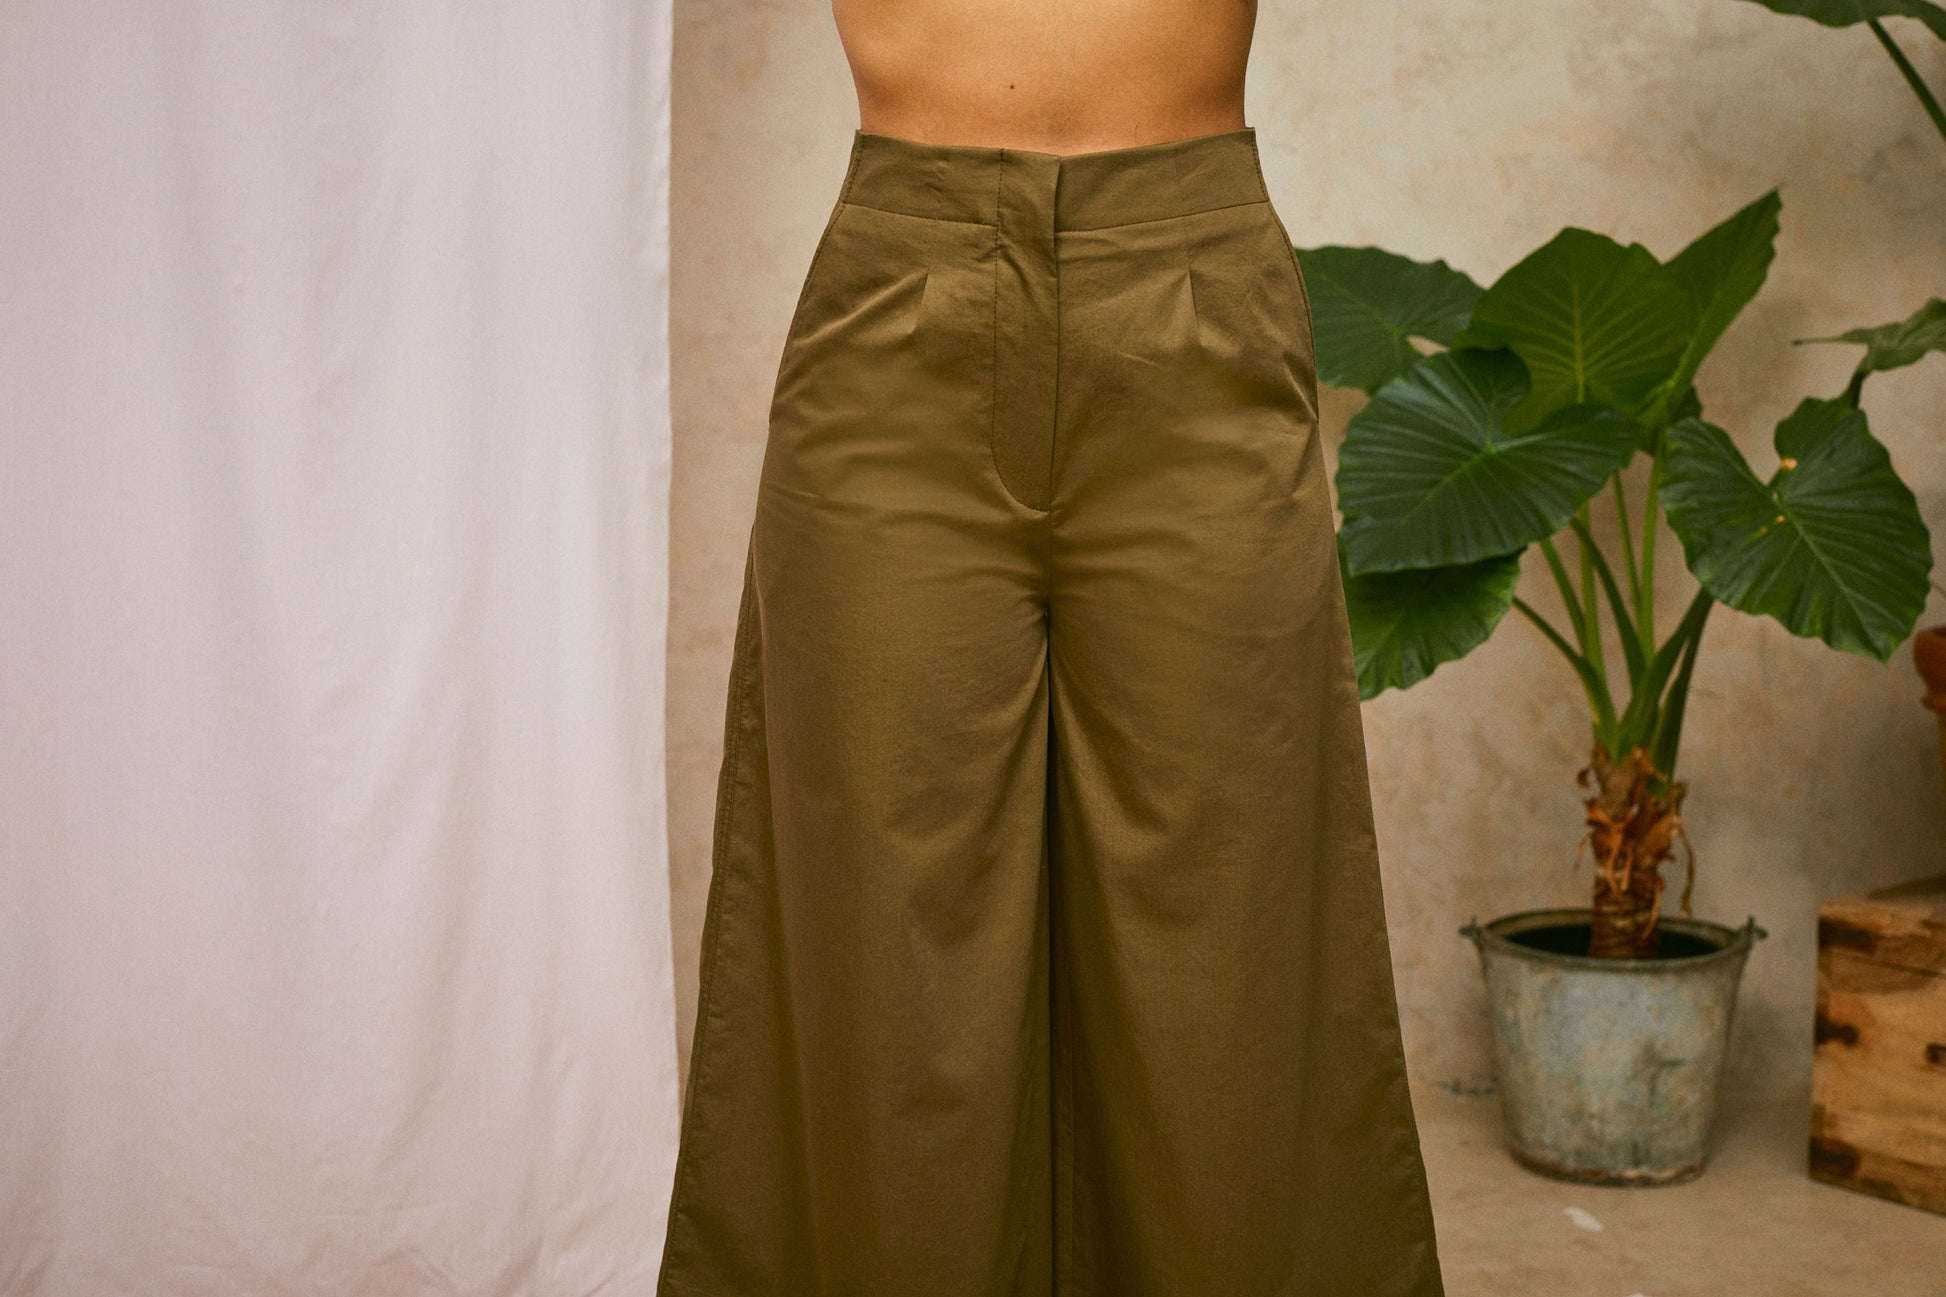 Cropped image of models wearing Saywood's Amelia khaki wide leg trouser, front waist view. A plant and drop of pink fabric can be seen in the background.